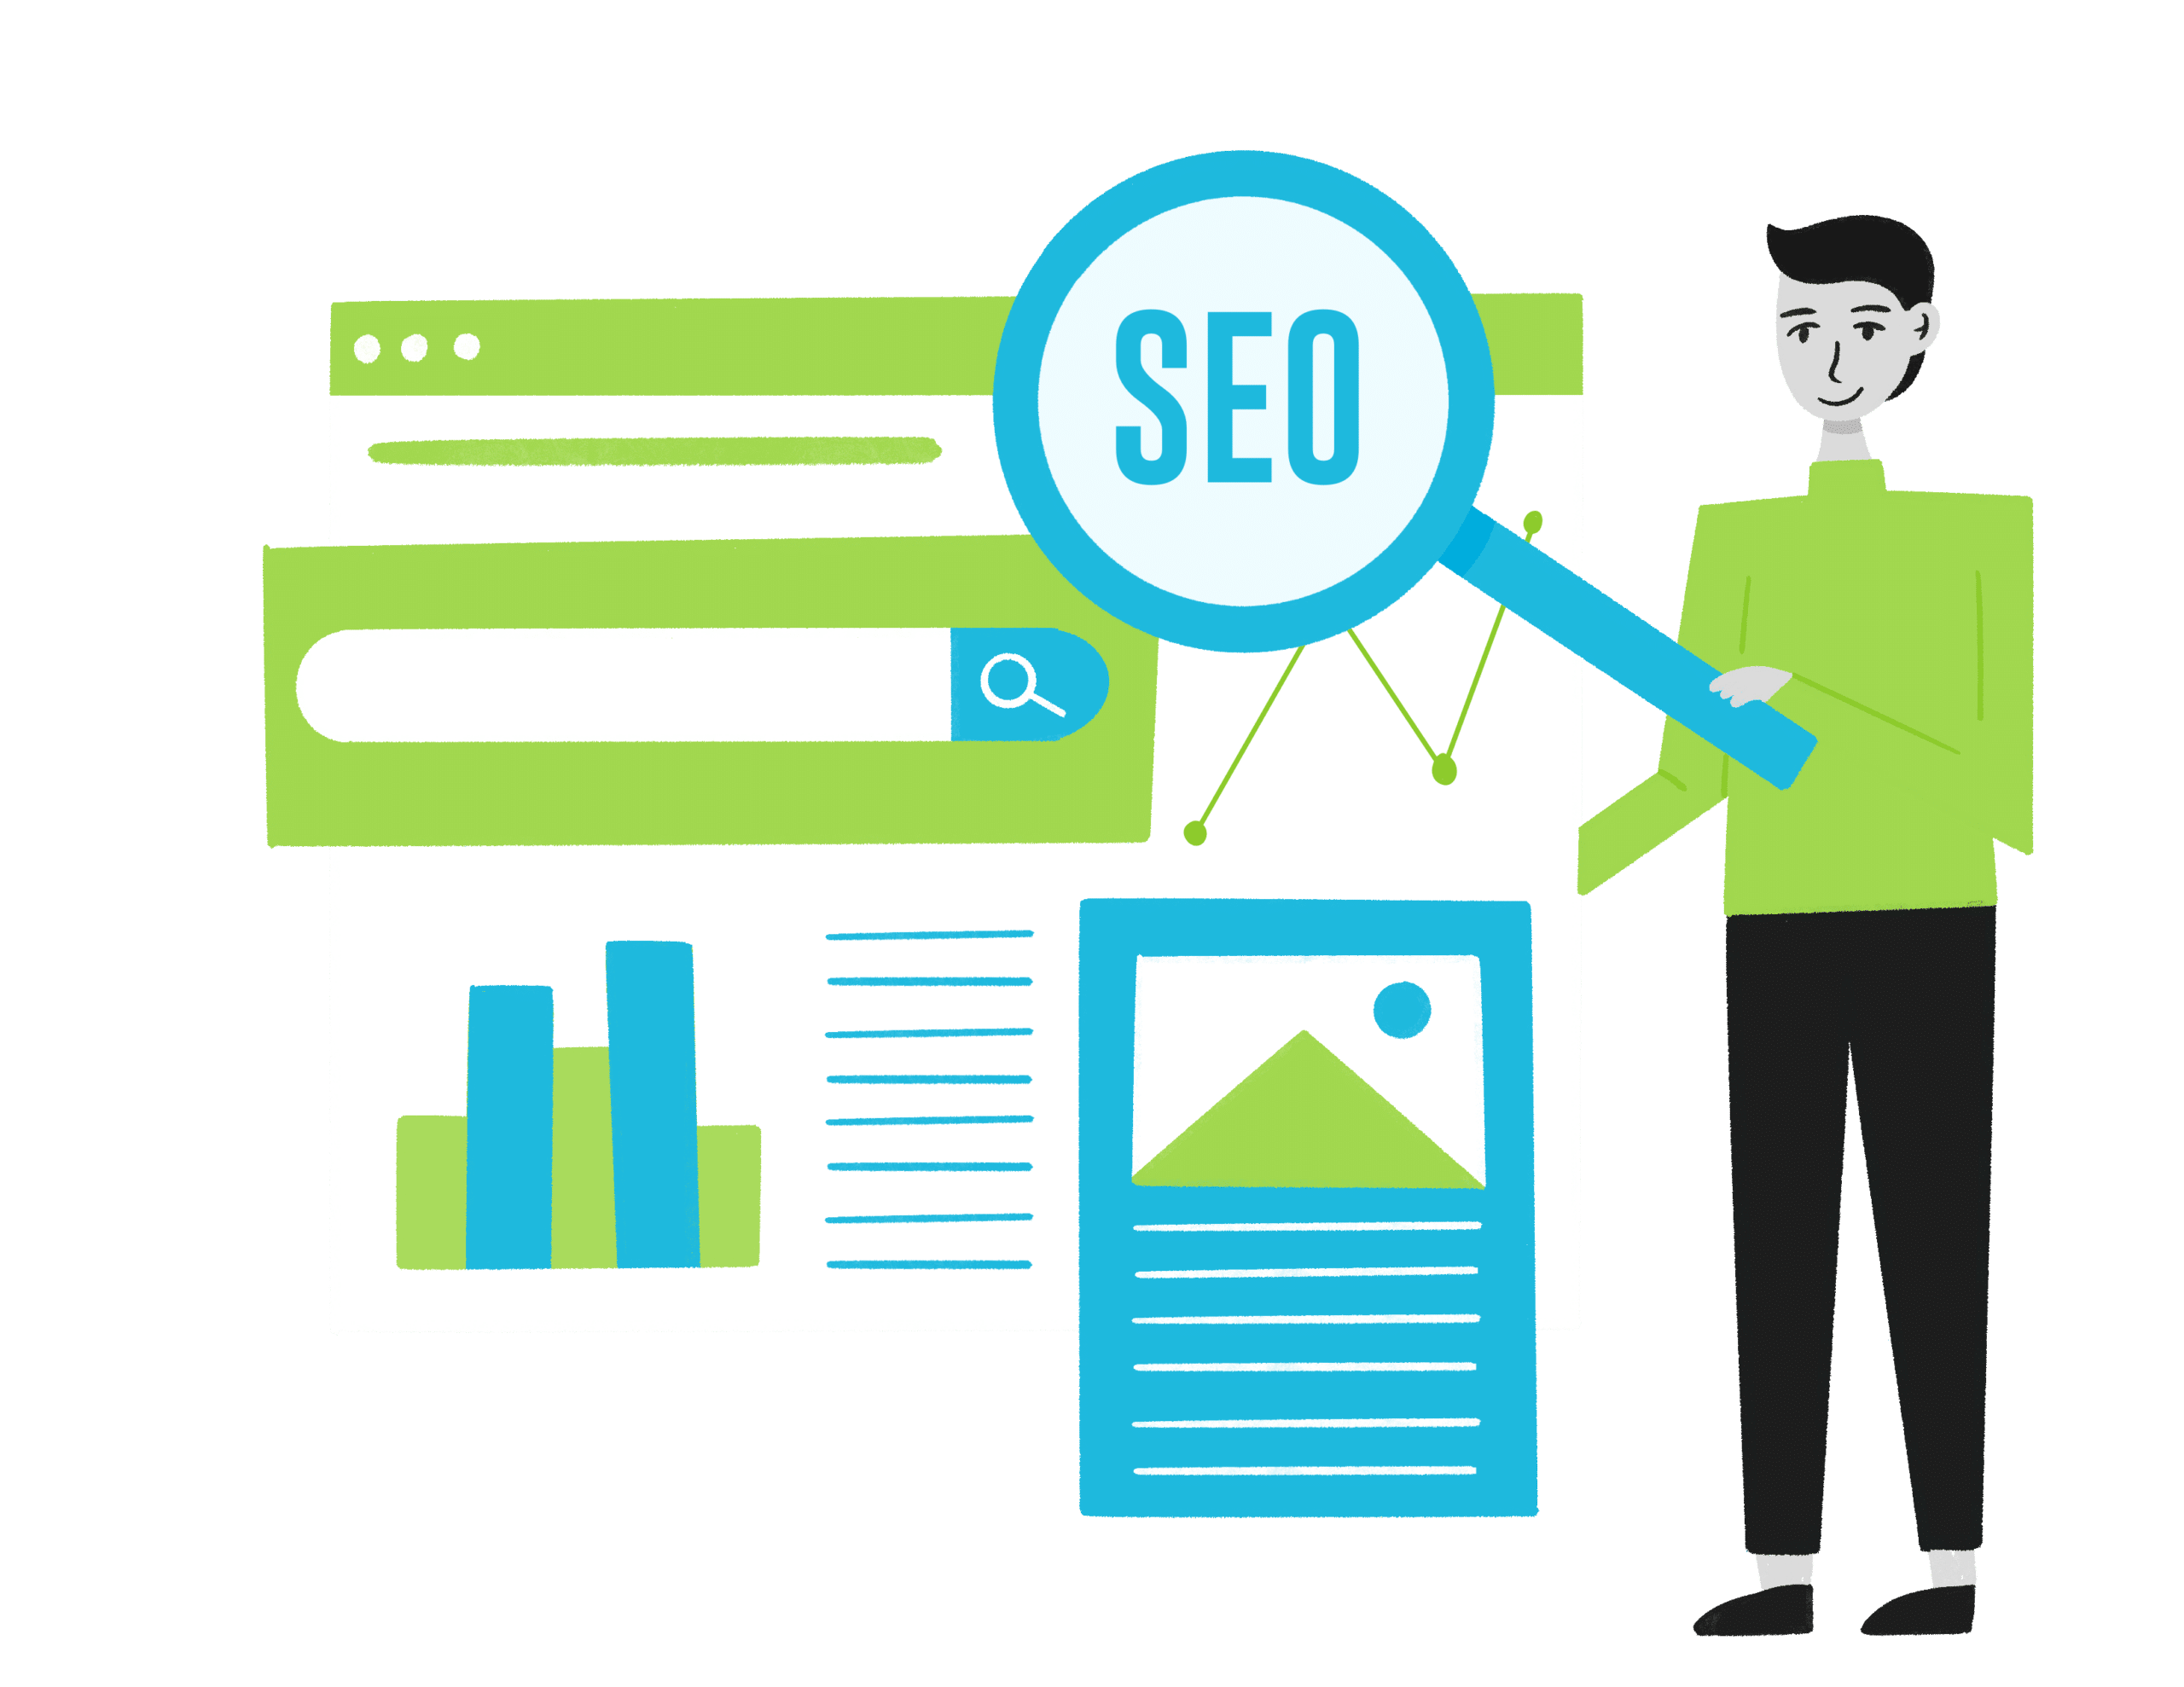 Search engine marketing (SEM) relies on paid advertisements to increase how well a website ranks on a Search Engine Results Page (SERP). SEM incorporates various forms of digital marketing strategies and is often used as a catch-all to describe PPC and SEO. However, SEM is often paid, whereas SEO is organic.